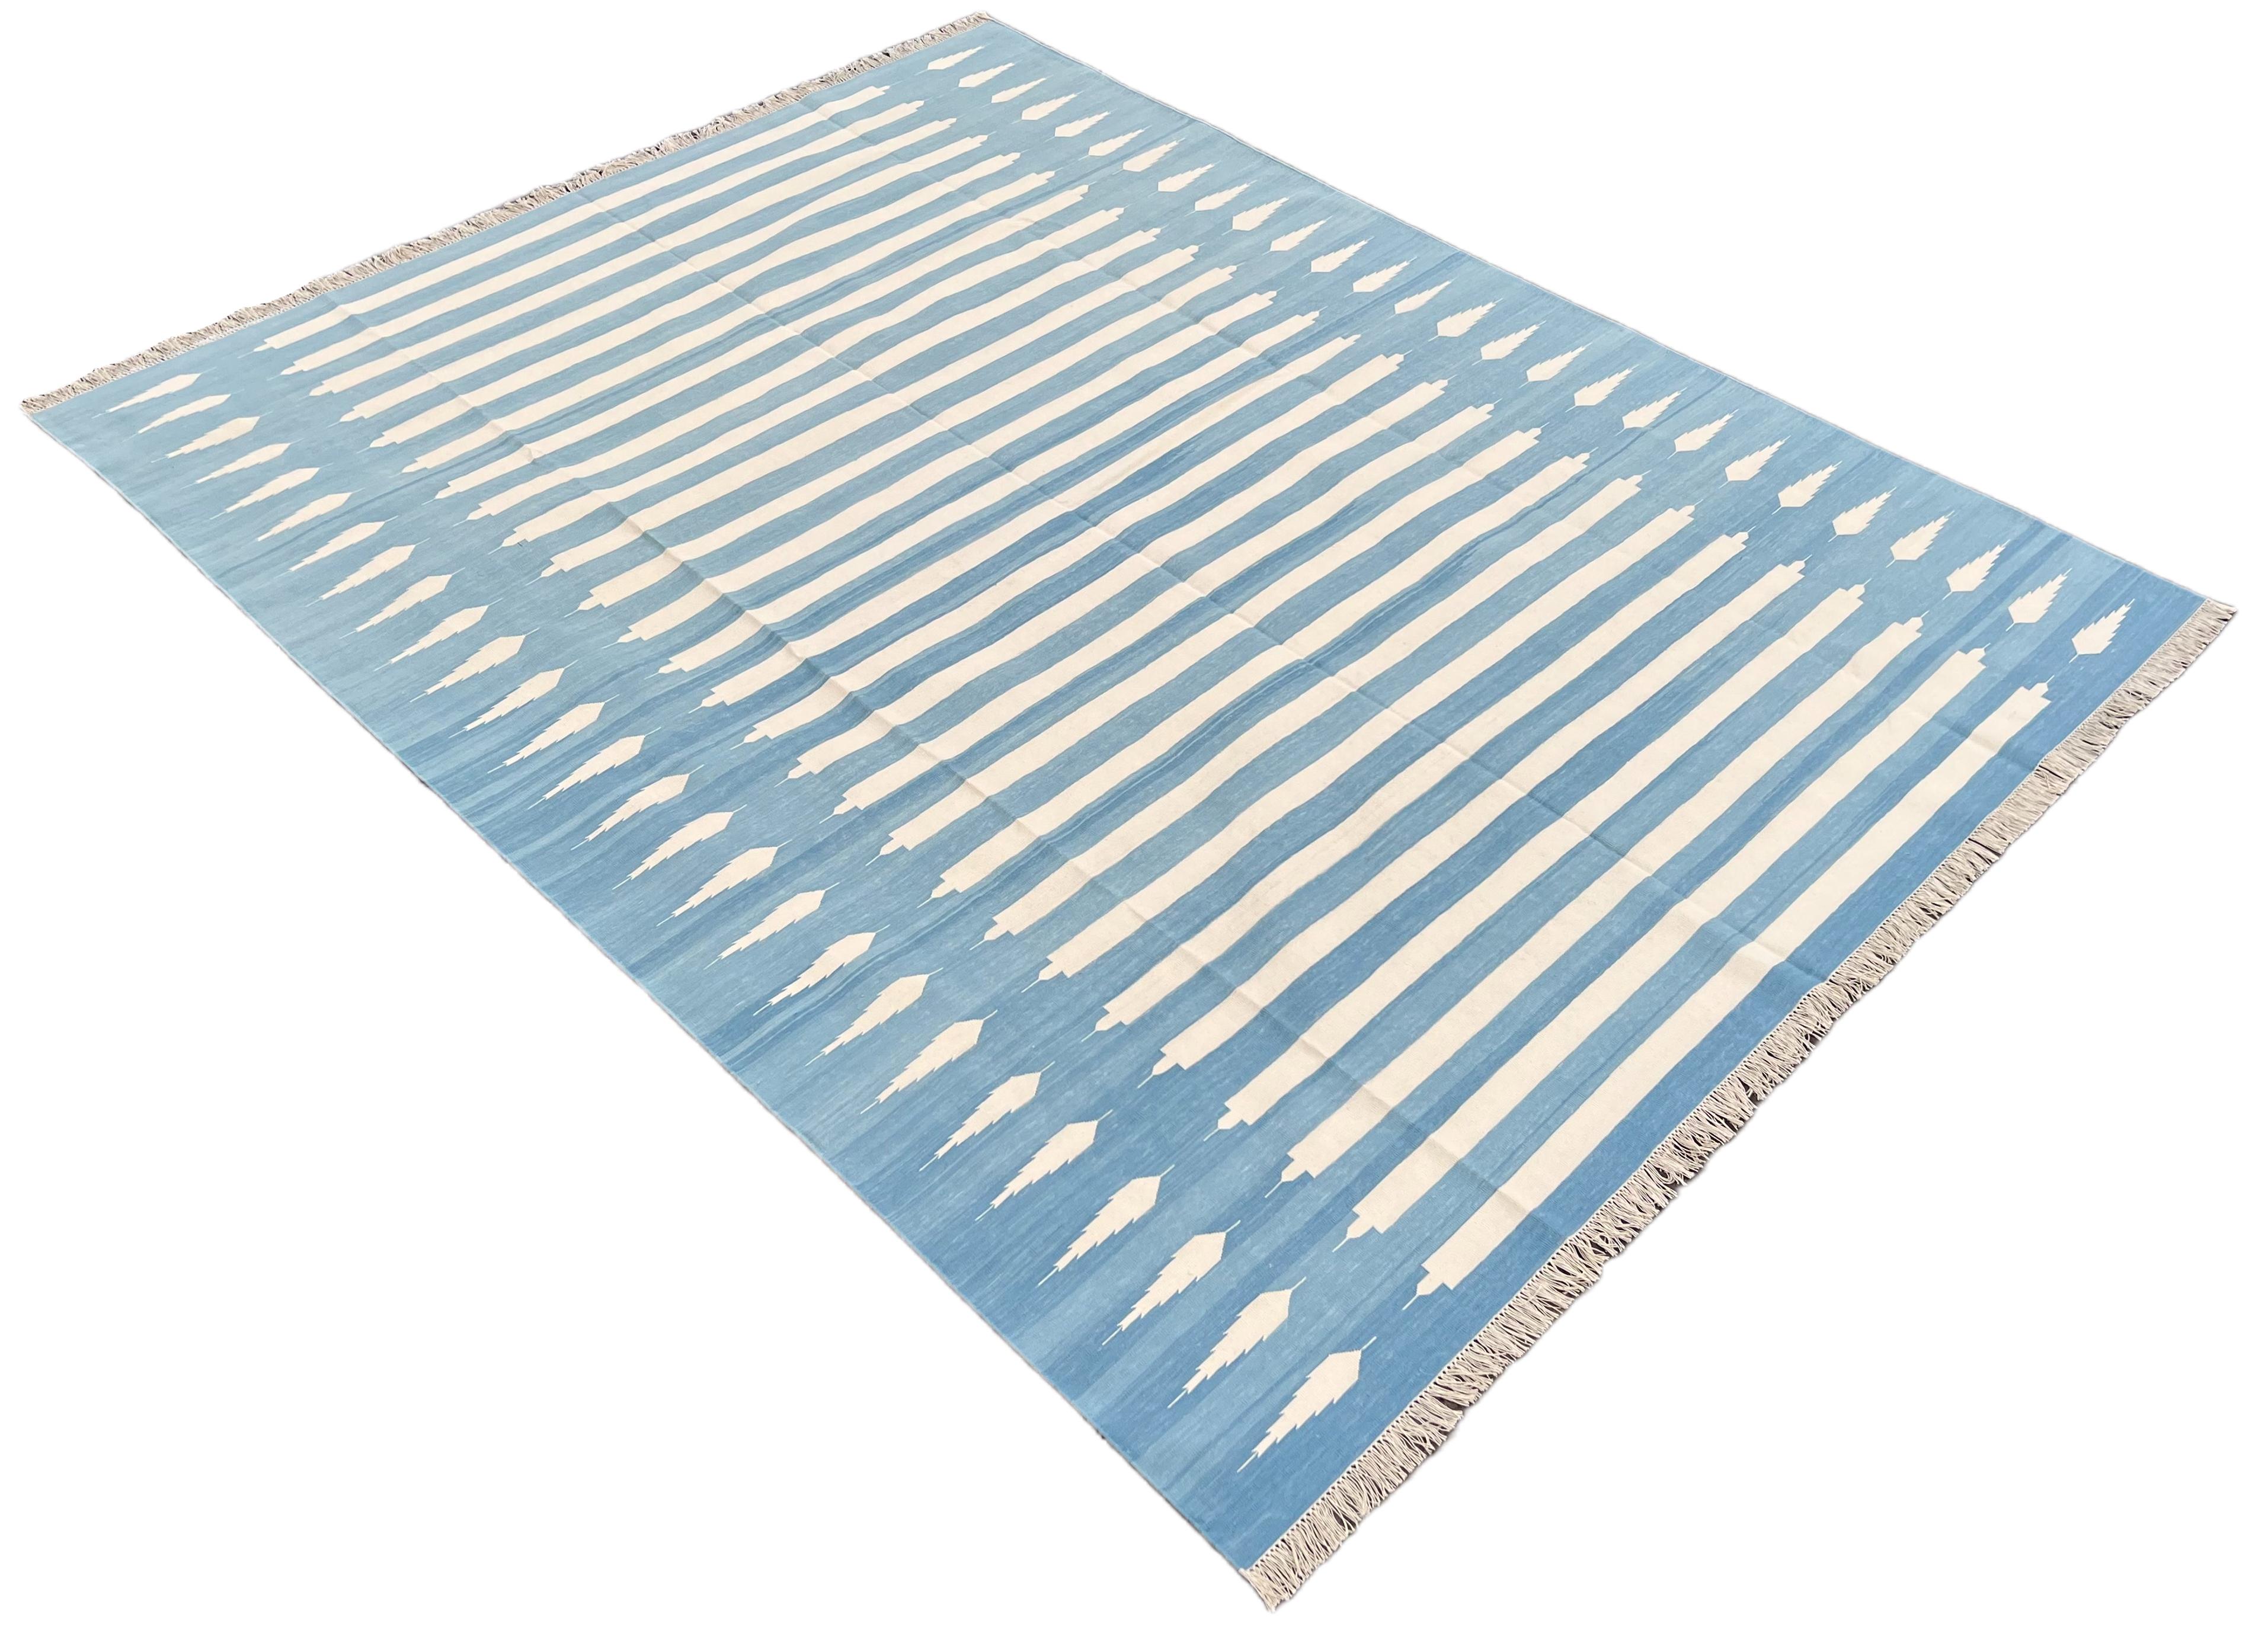 Cotton Natural Vegetable Dyed Sky Blue And White Striped Indian Rug-8'x10'
These special flat-weave dhurries are hand-woven with 15 ply 100% cotton yarn. Due to the special manufacturing techniques used to create our rugs, the size and color of each